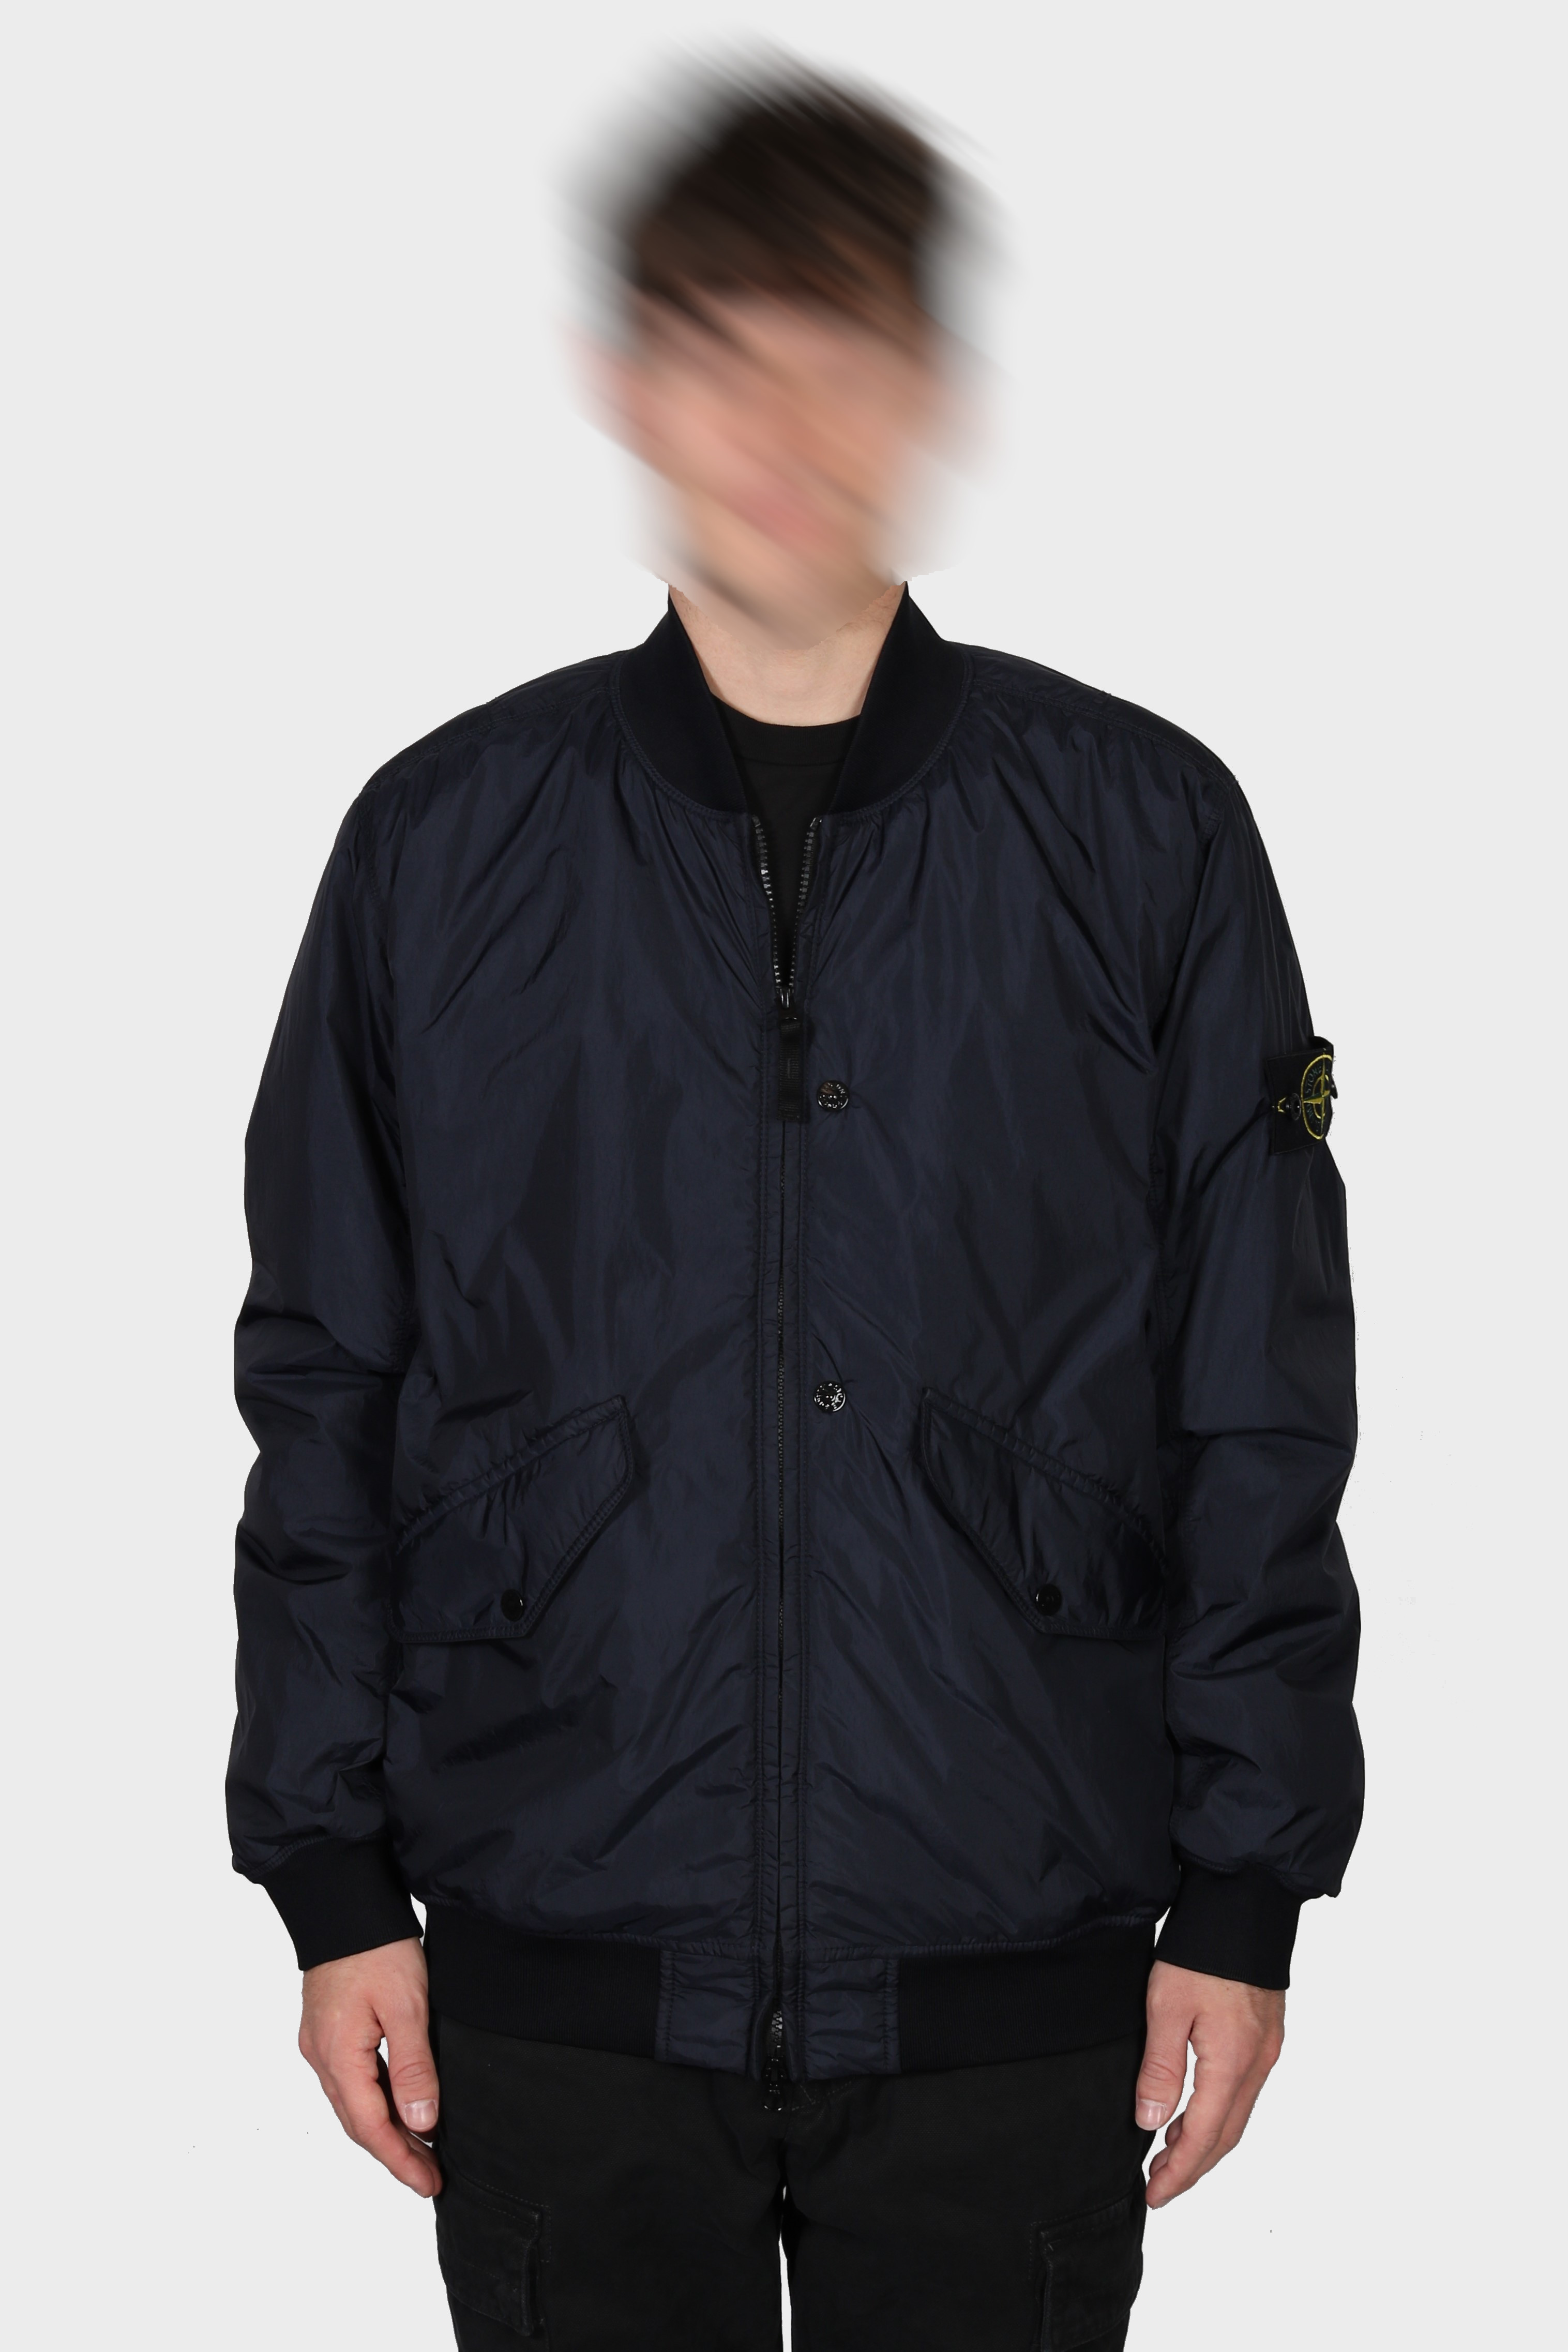 STONE ISLAND Garment Dyed Crinkle Reps Bomber Jacket in Navy